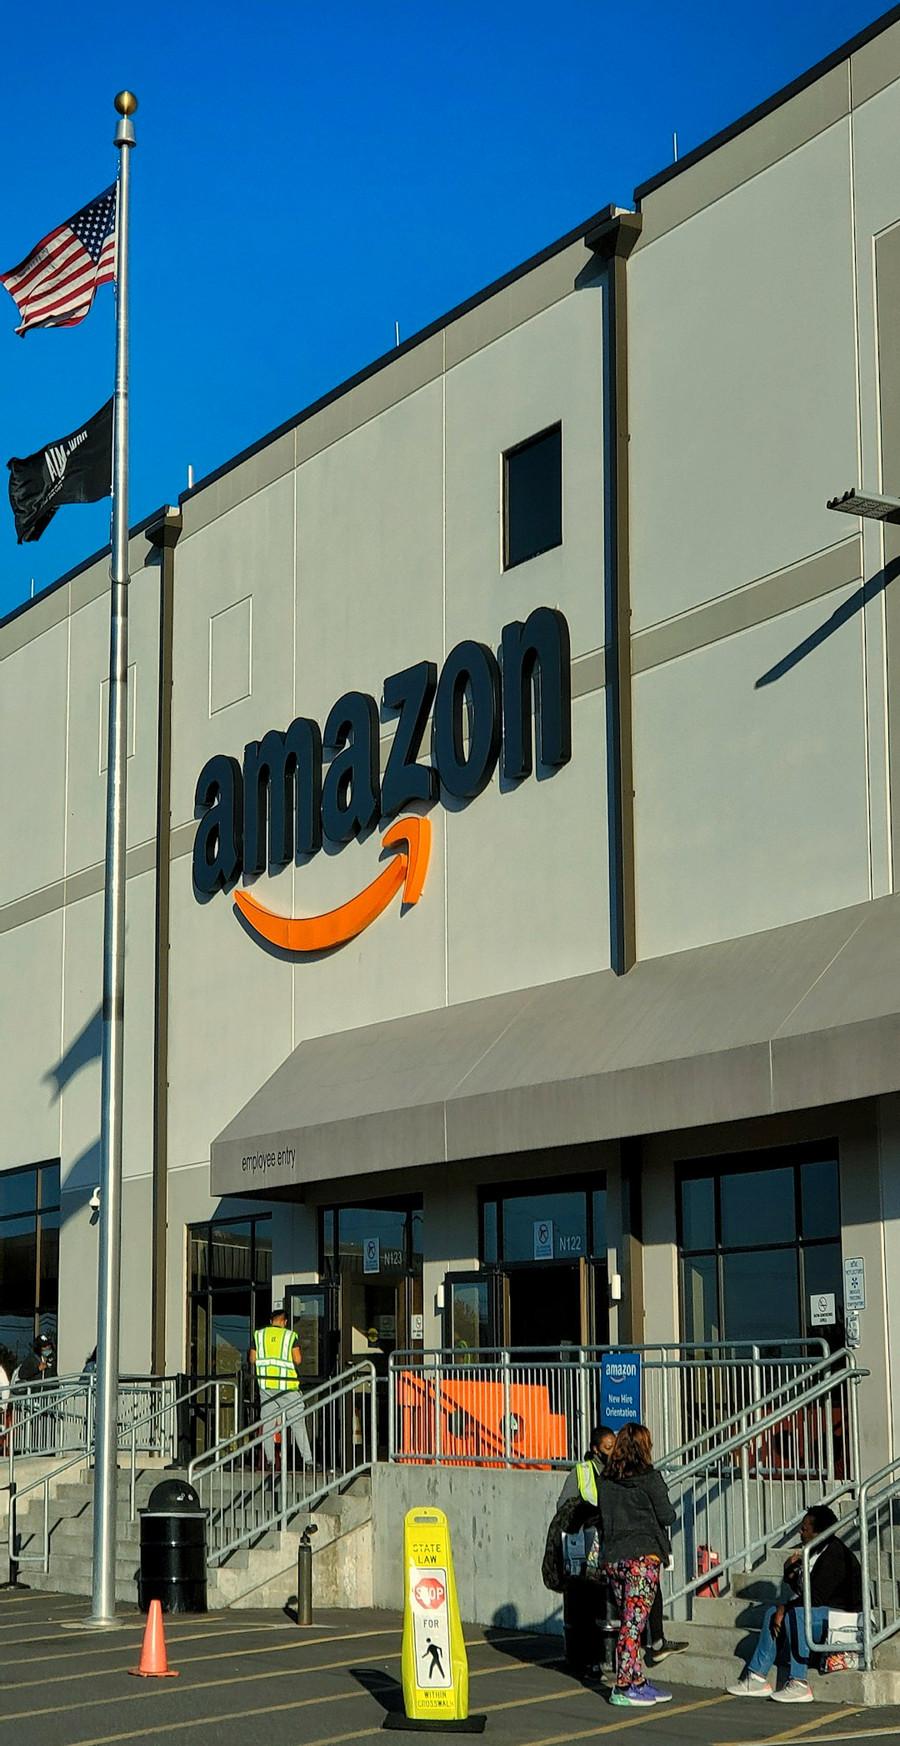 The Success of Amazon Is Built on Its Leadership Ideals